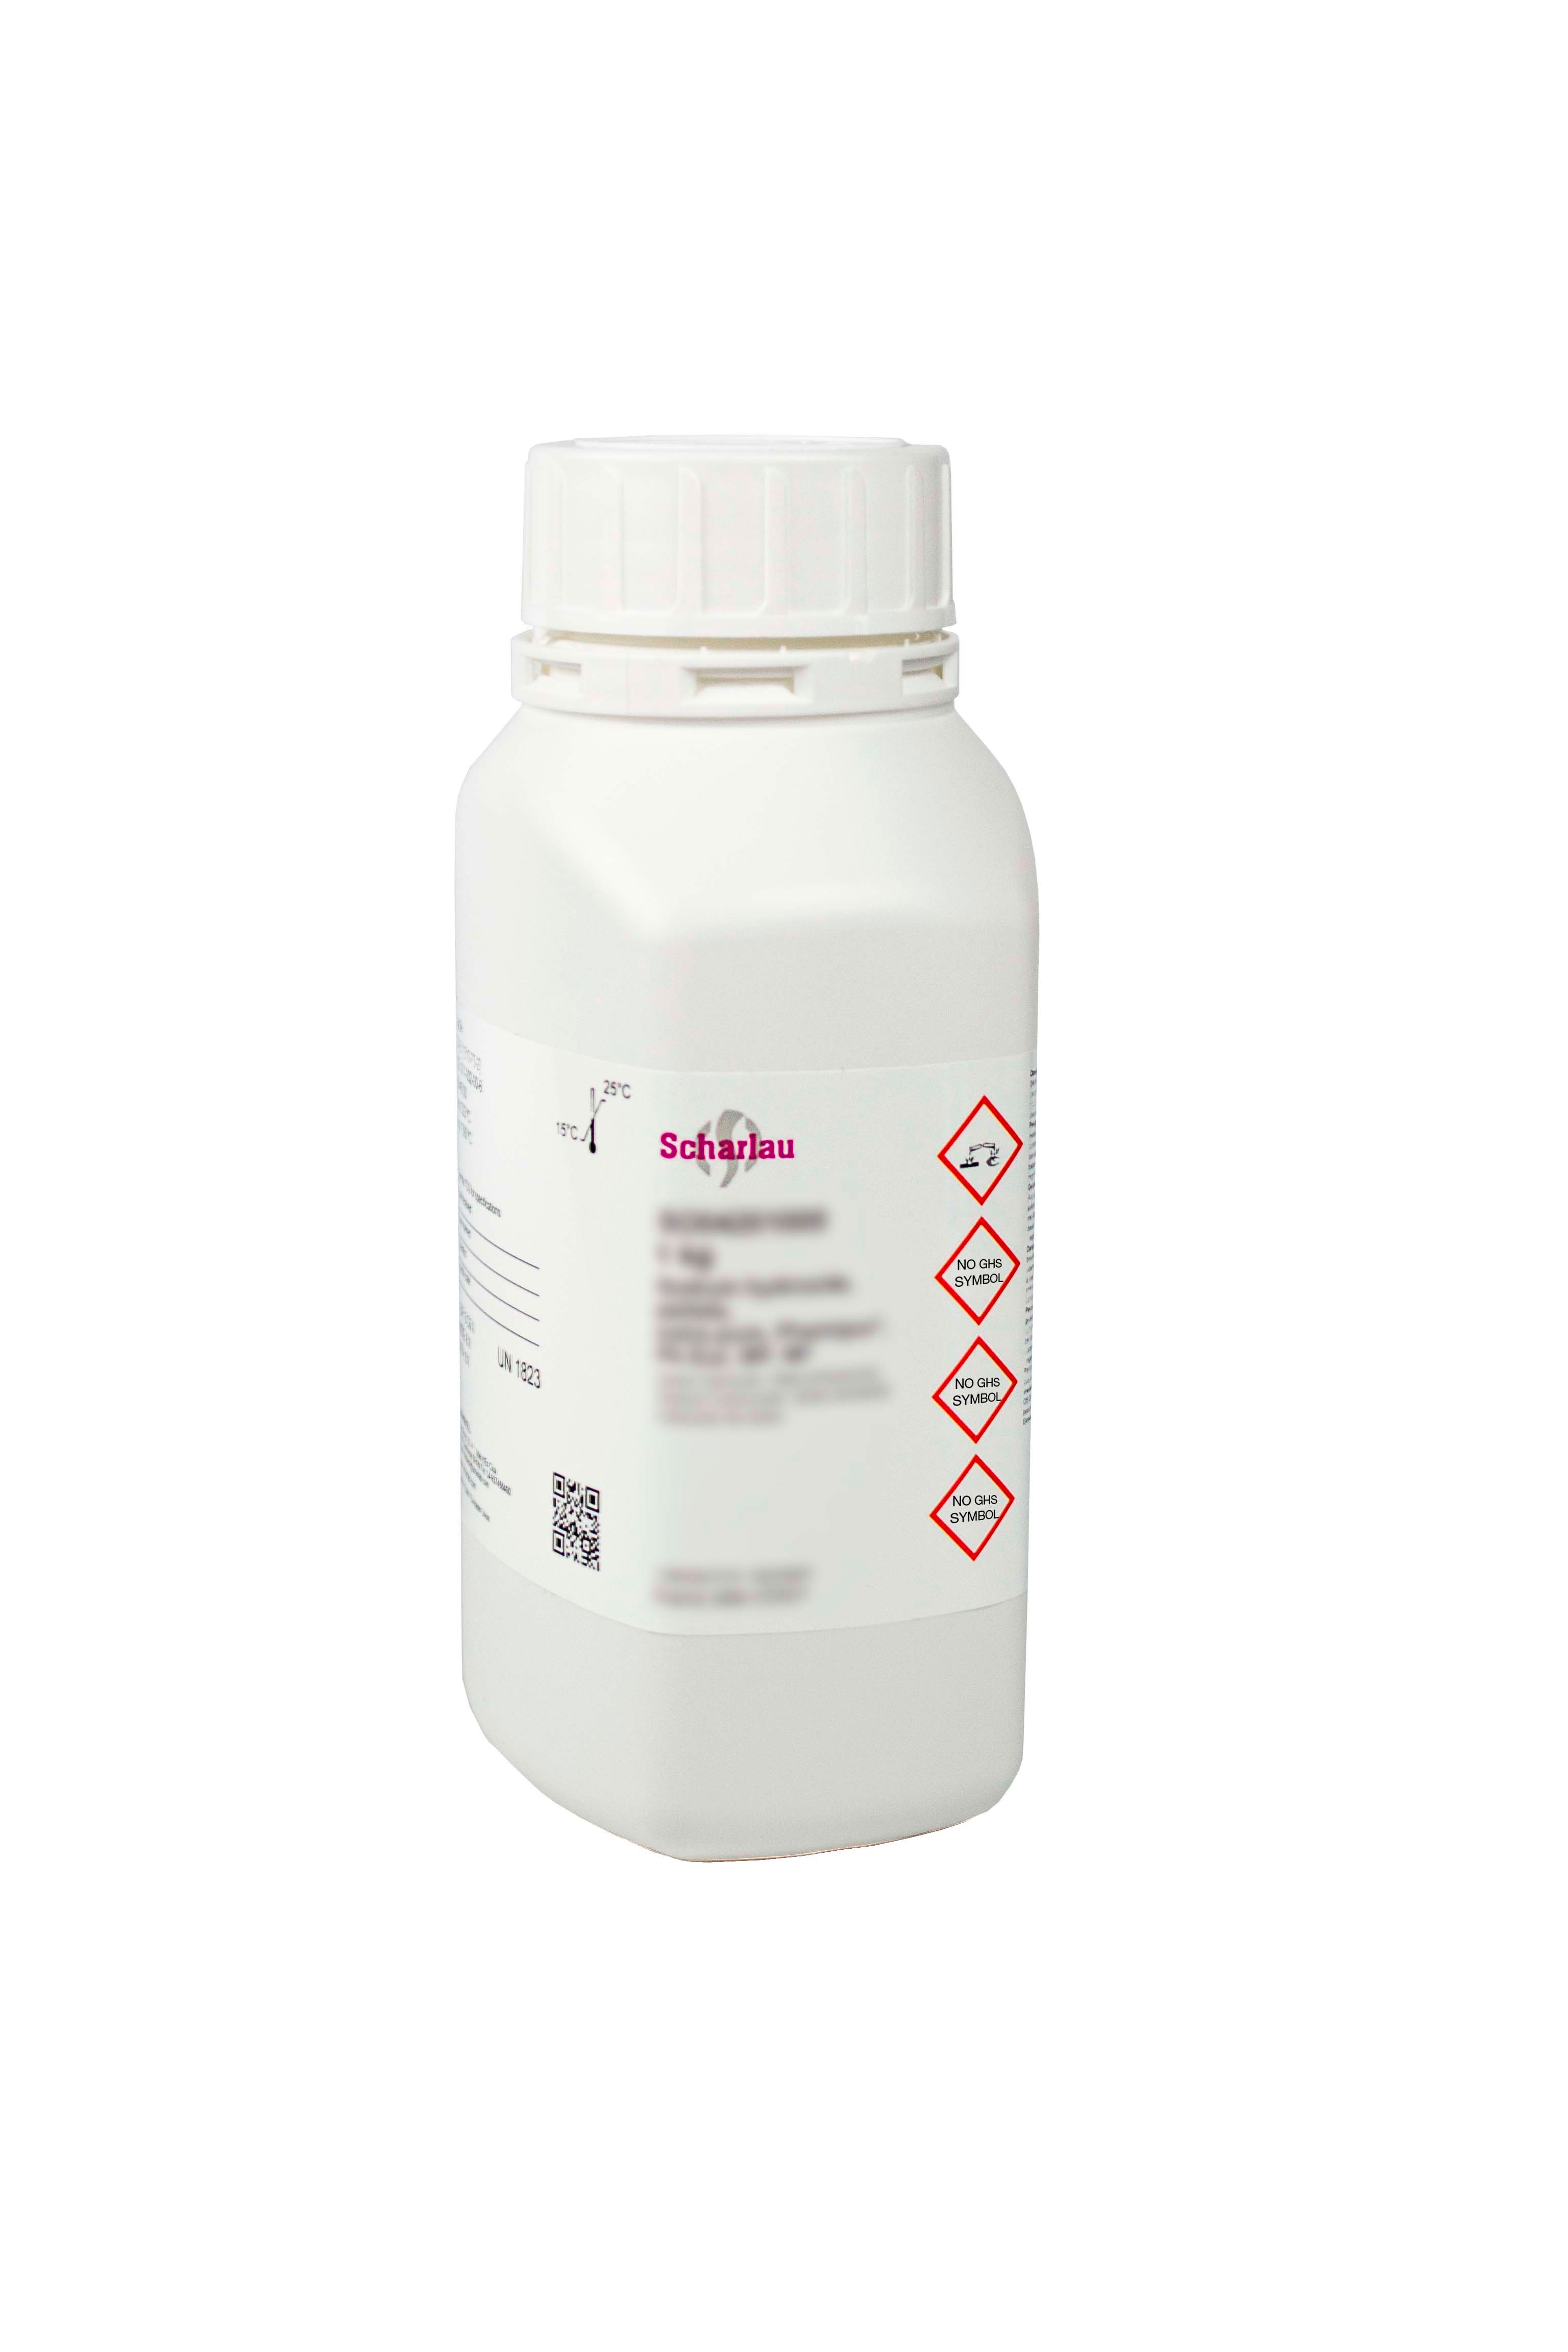 di-Sodium tartrate dihydrate, for analysis, ExpertQ®, ACS